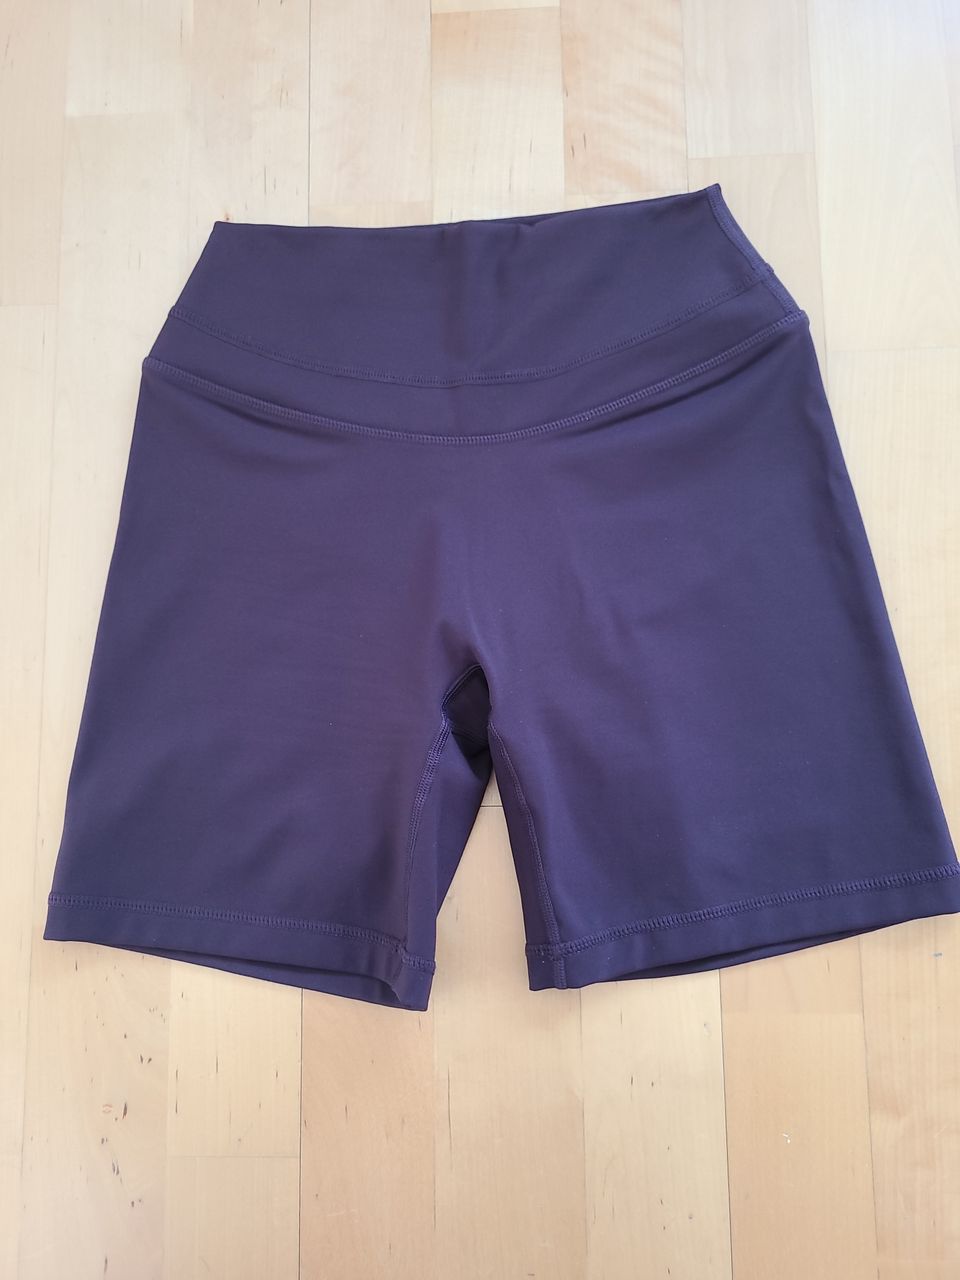 Oner Active Unified shorts, S